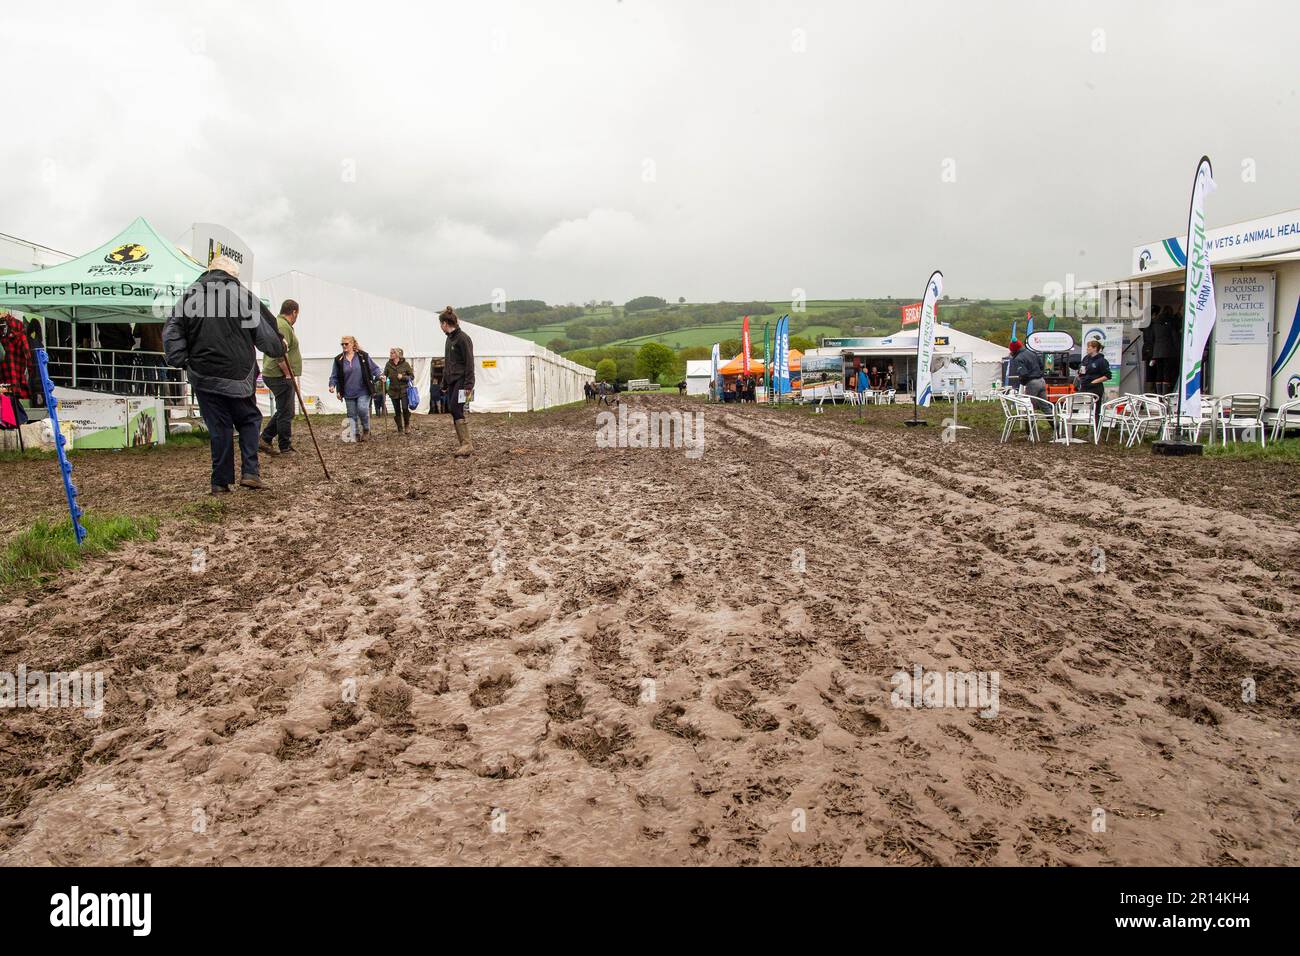 mud and muddy conditions at country show in UK Stock Photo